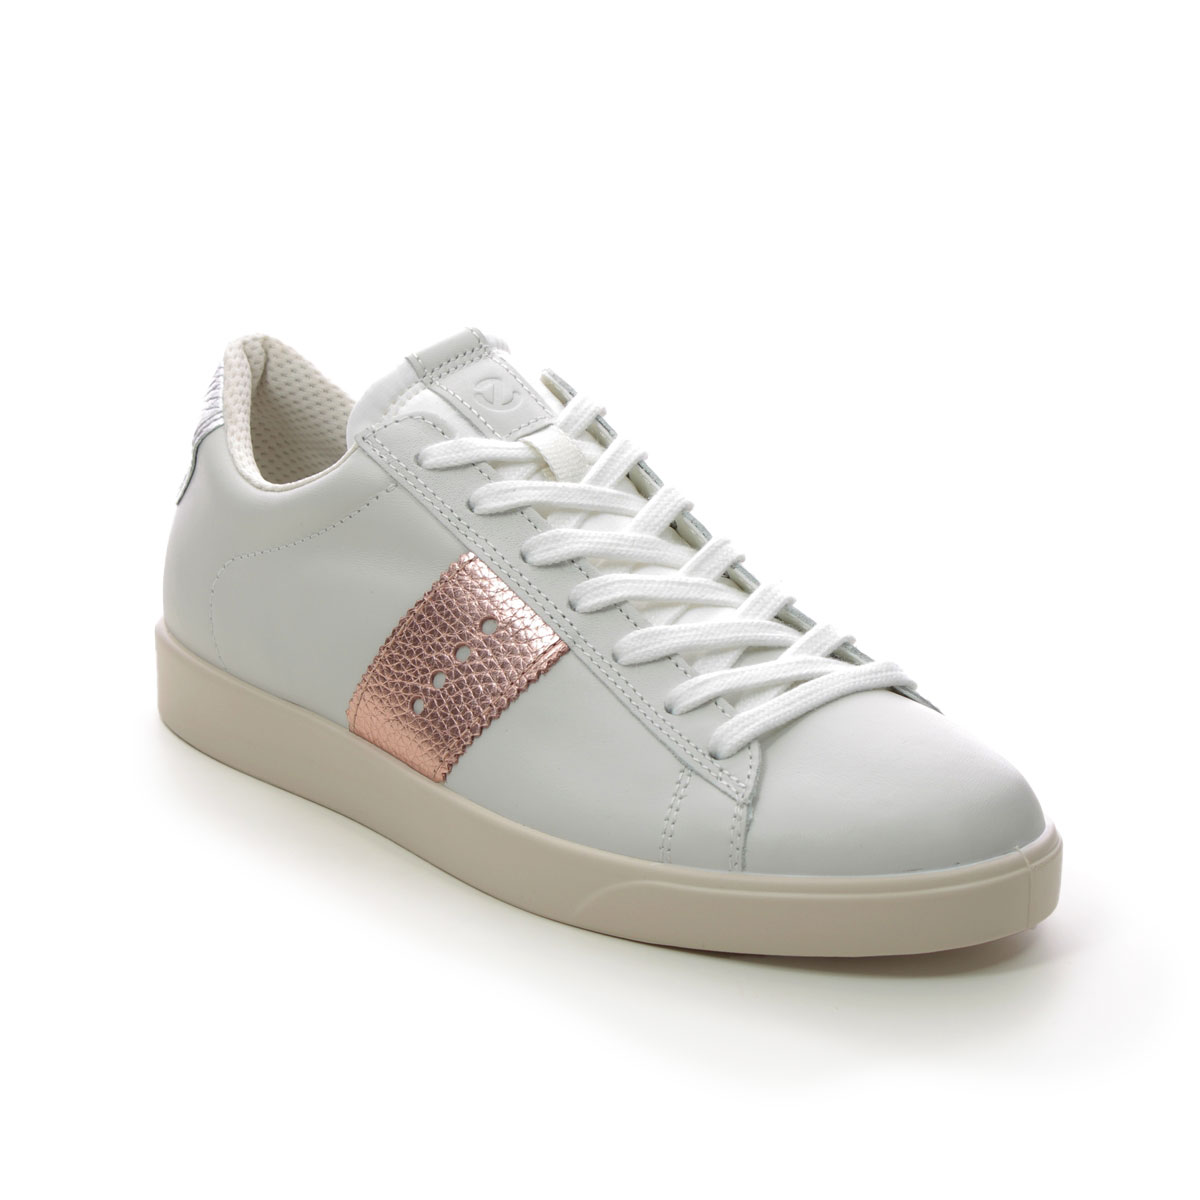 Ecco Street Lite Womens White Rose Gold Womens Trainers 212803-60717 In Size 36 In Plain White Rose Gold